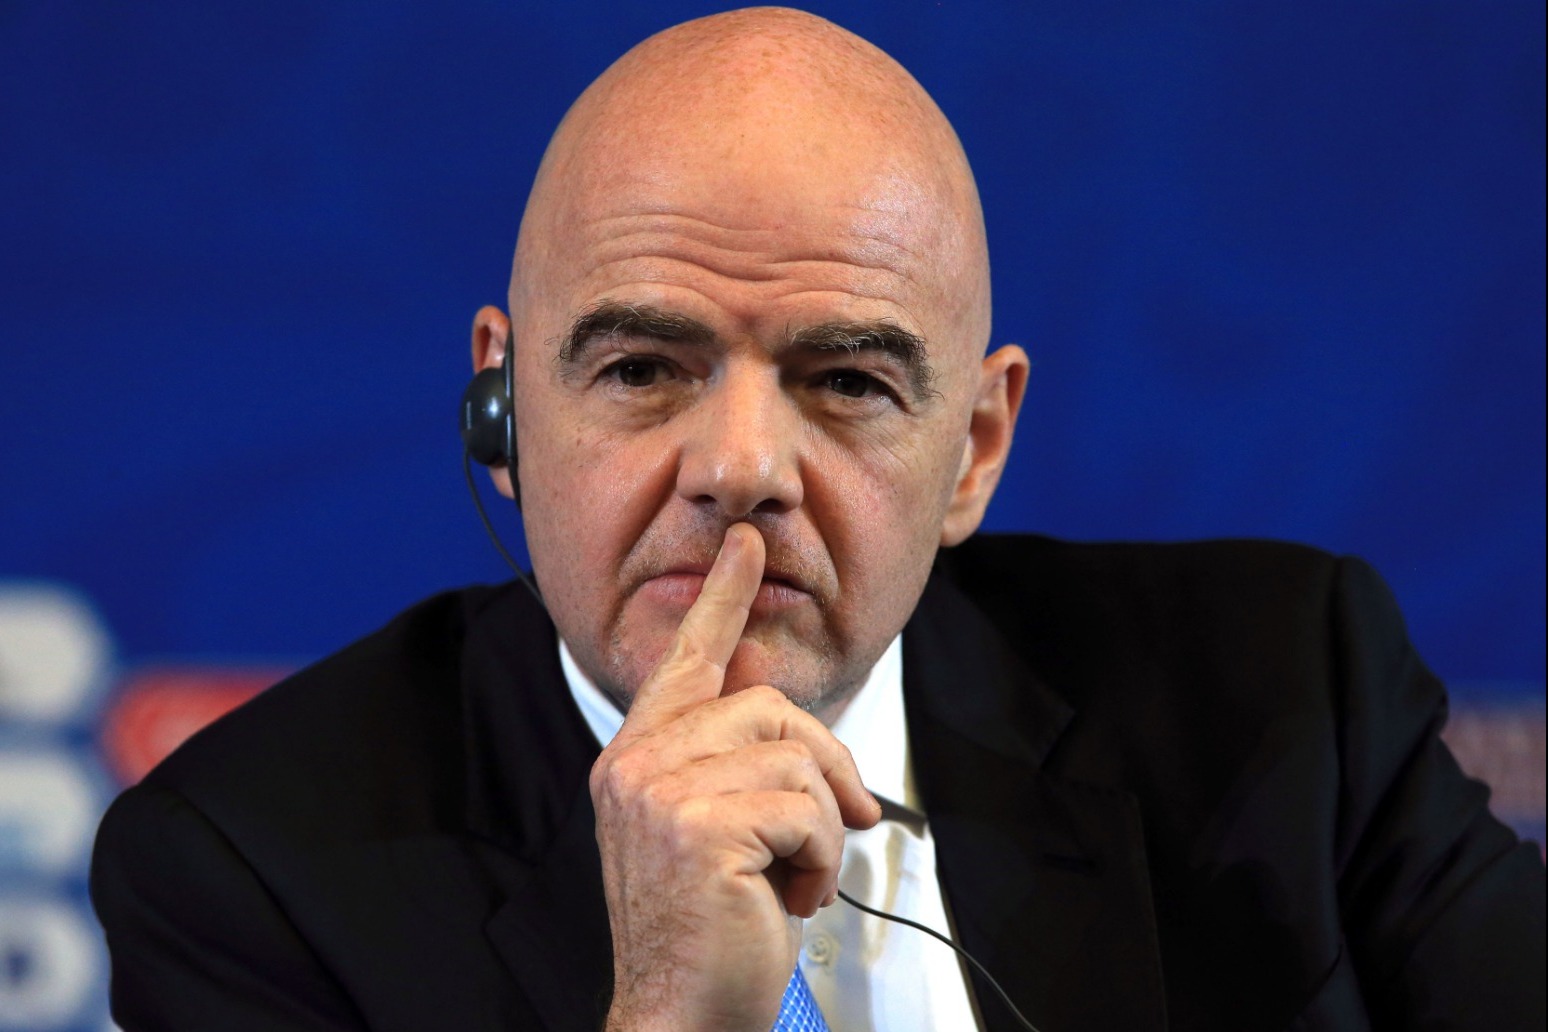 FIFA PRESIDENT INFANTINO CALLS FOR NEW EFFECTIVE WAYS TO ERADICATE RACISM 